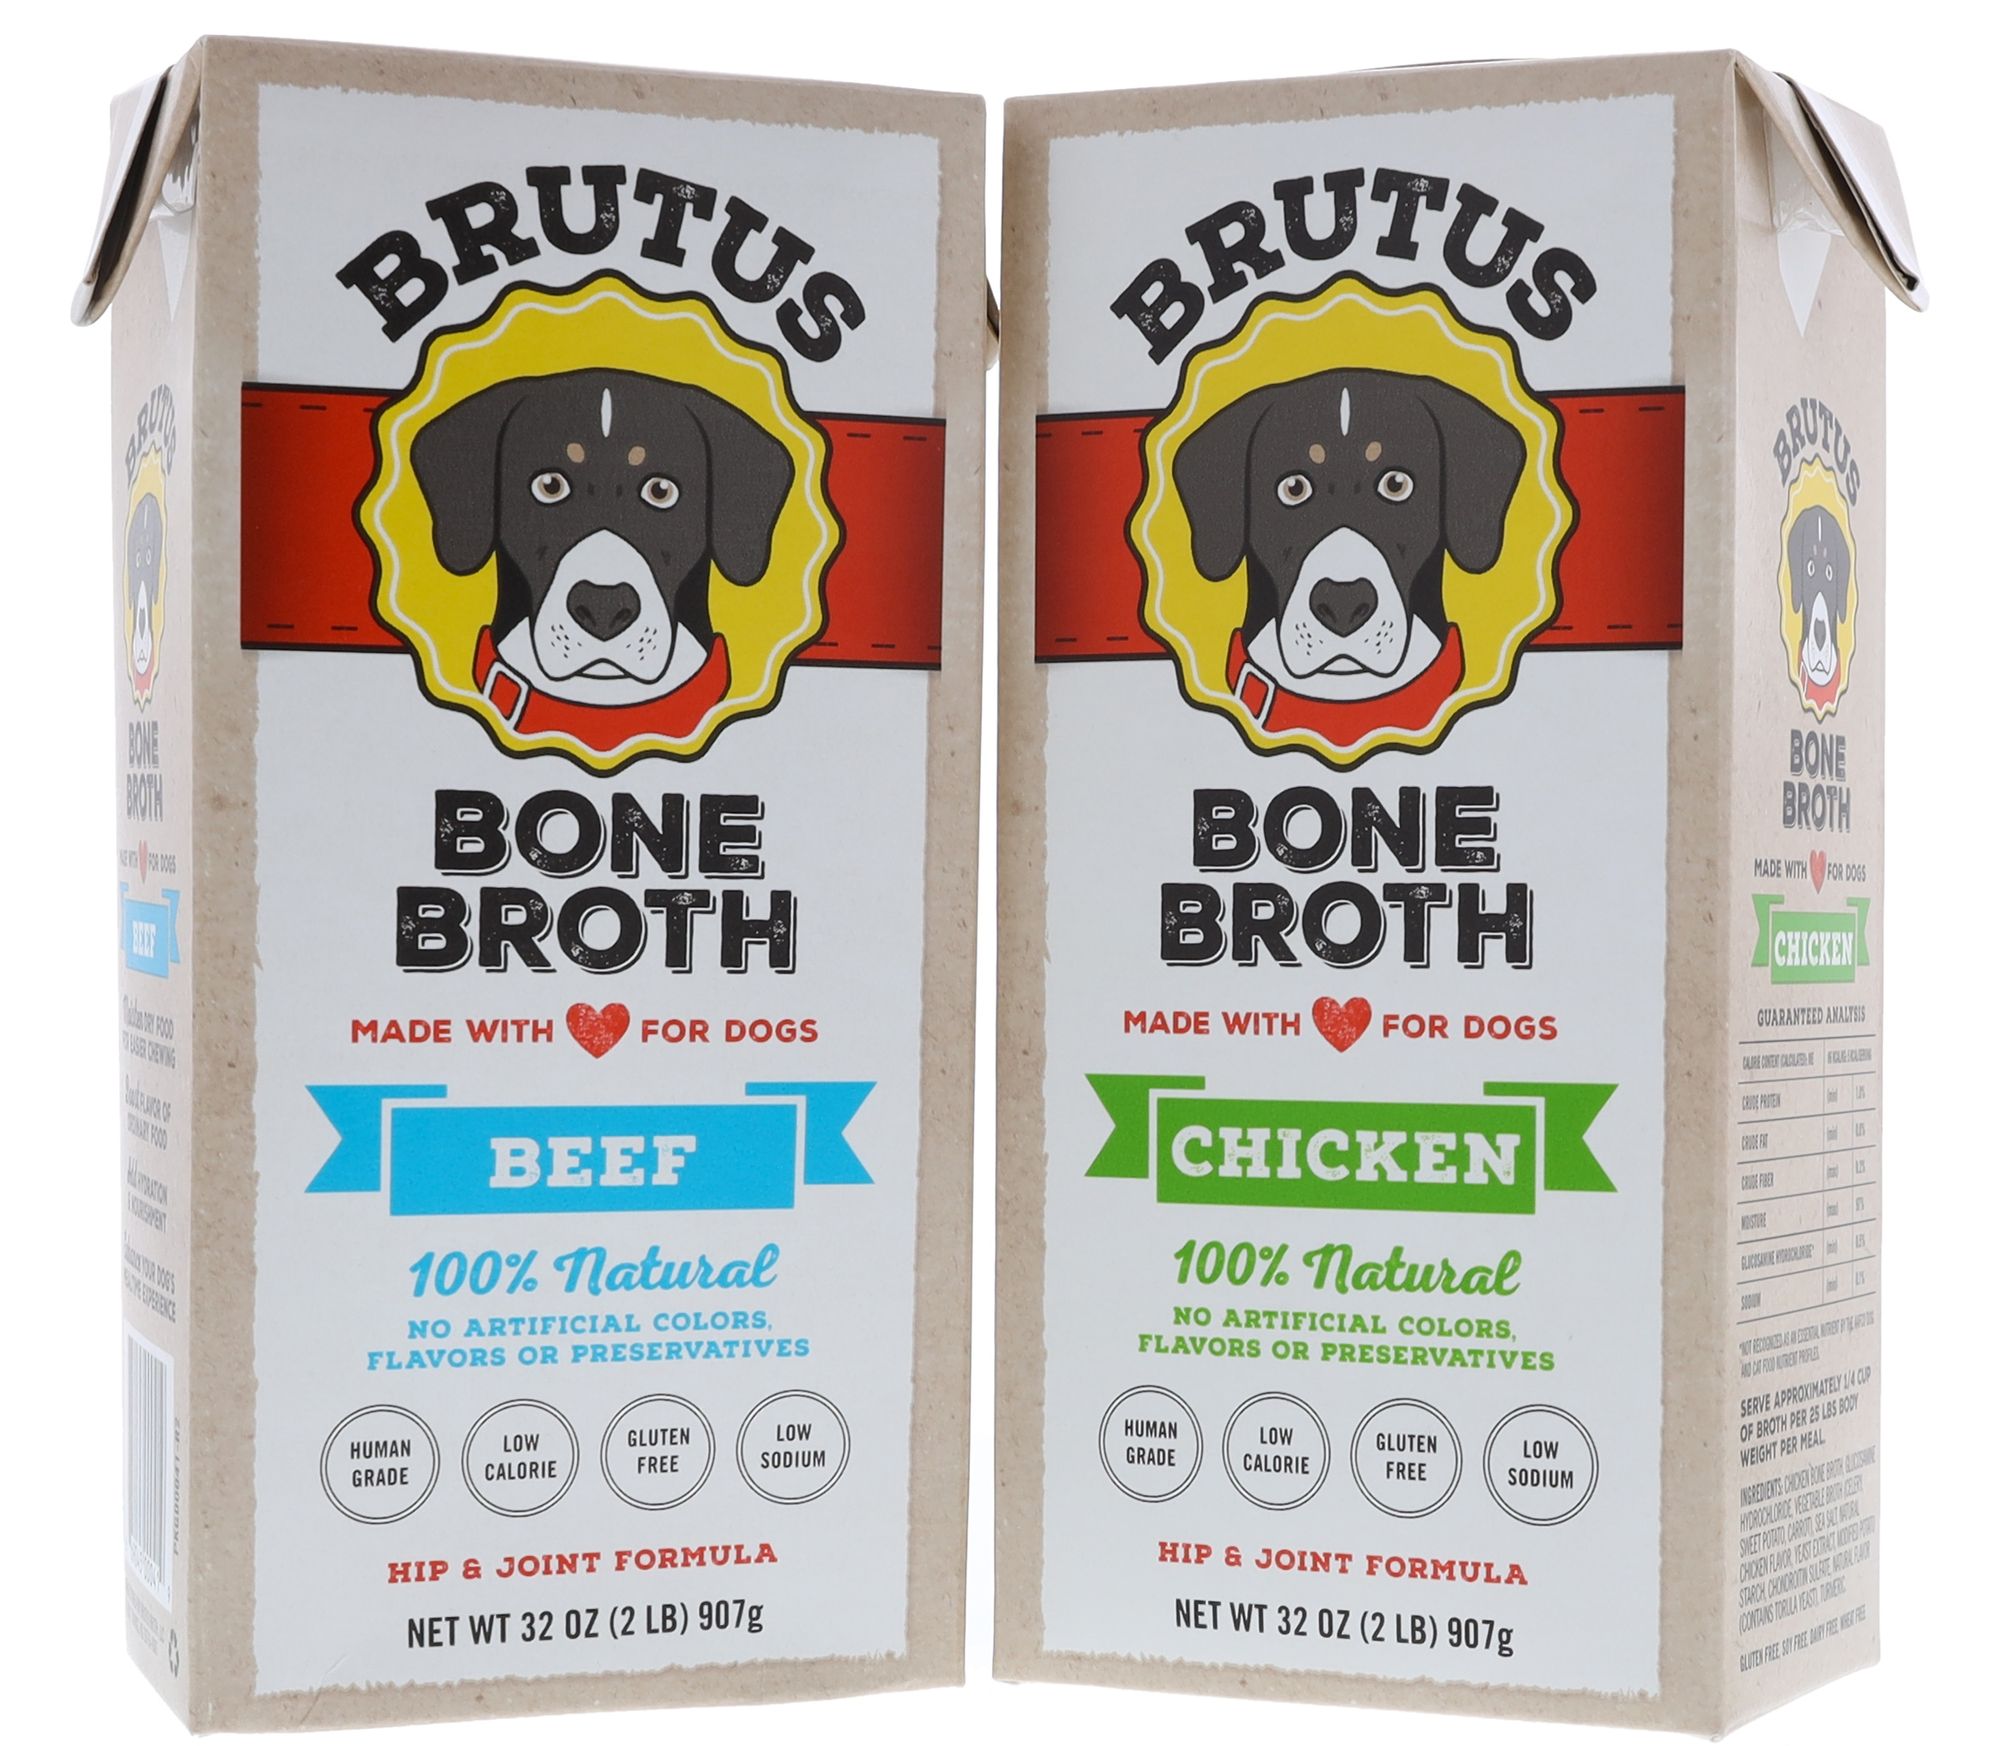 Brutus Broth products